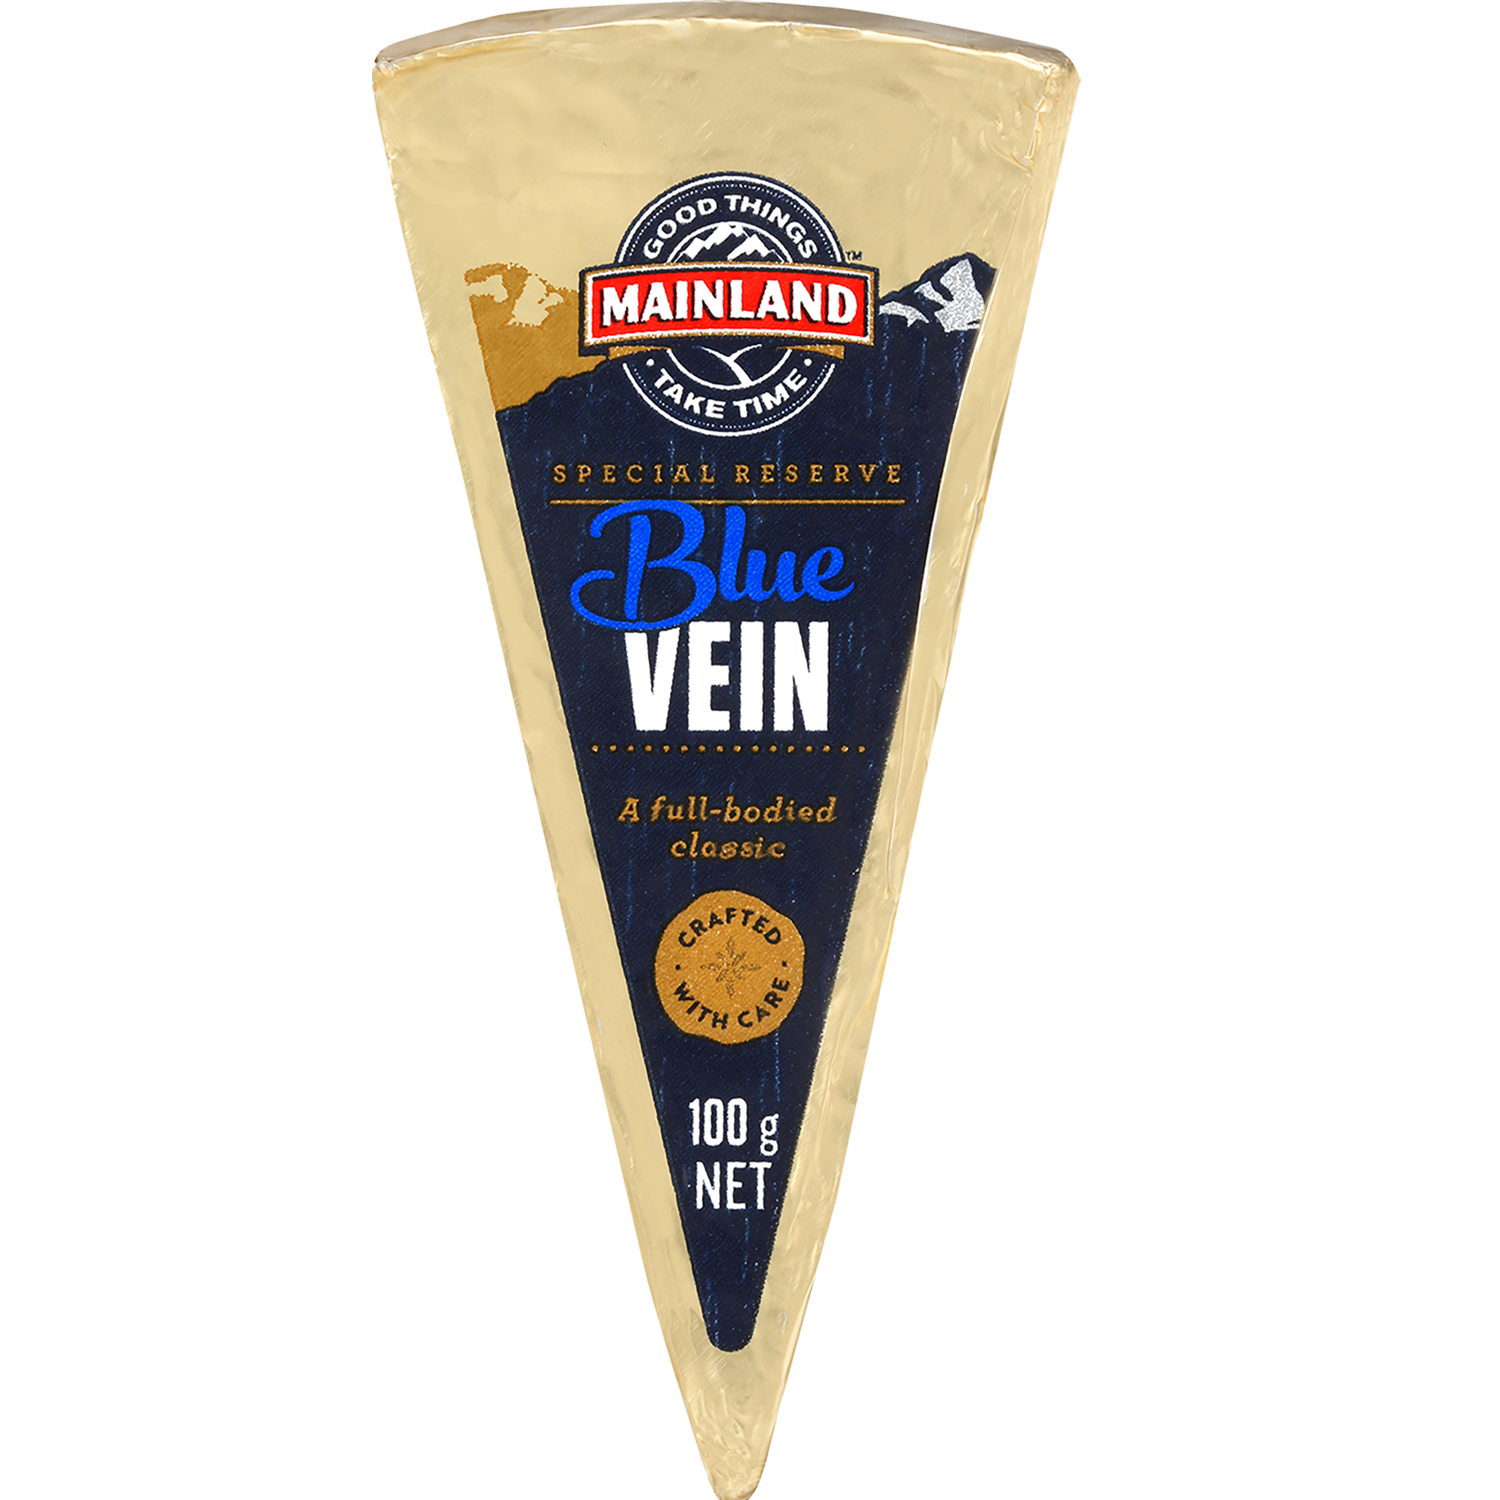 Mainland Special Reserve Blue Vein Cheese 100g